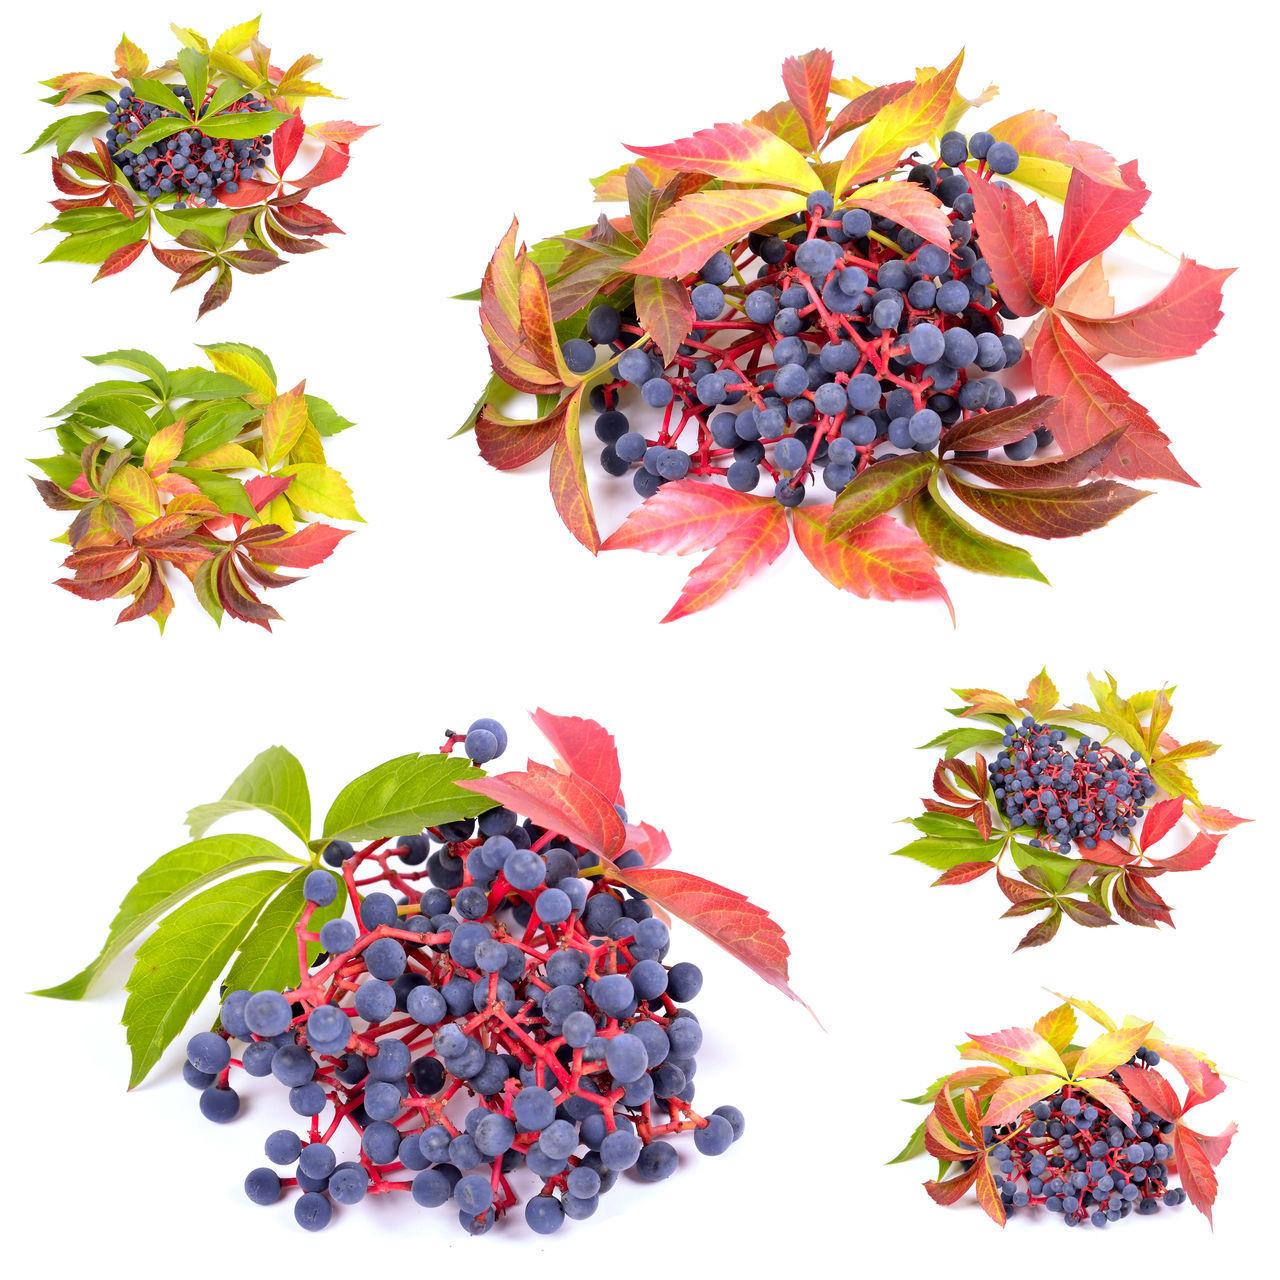 HIGH ANGLE VIEW OF BERRIES ON PLANT AGAINST WHITE BACKGROUND